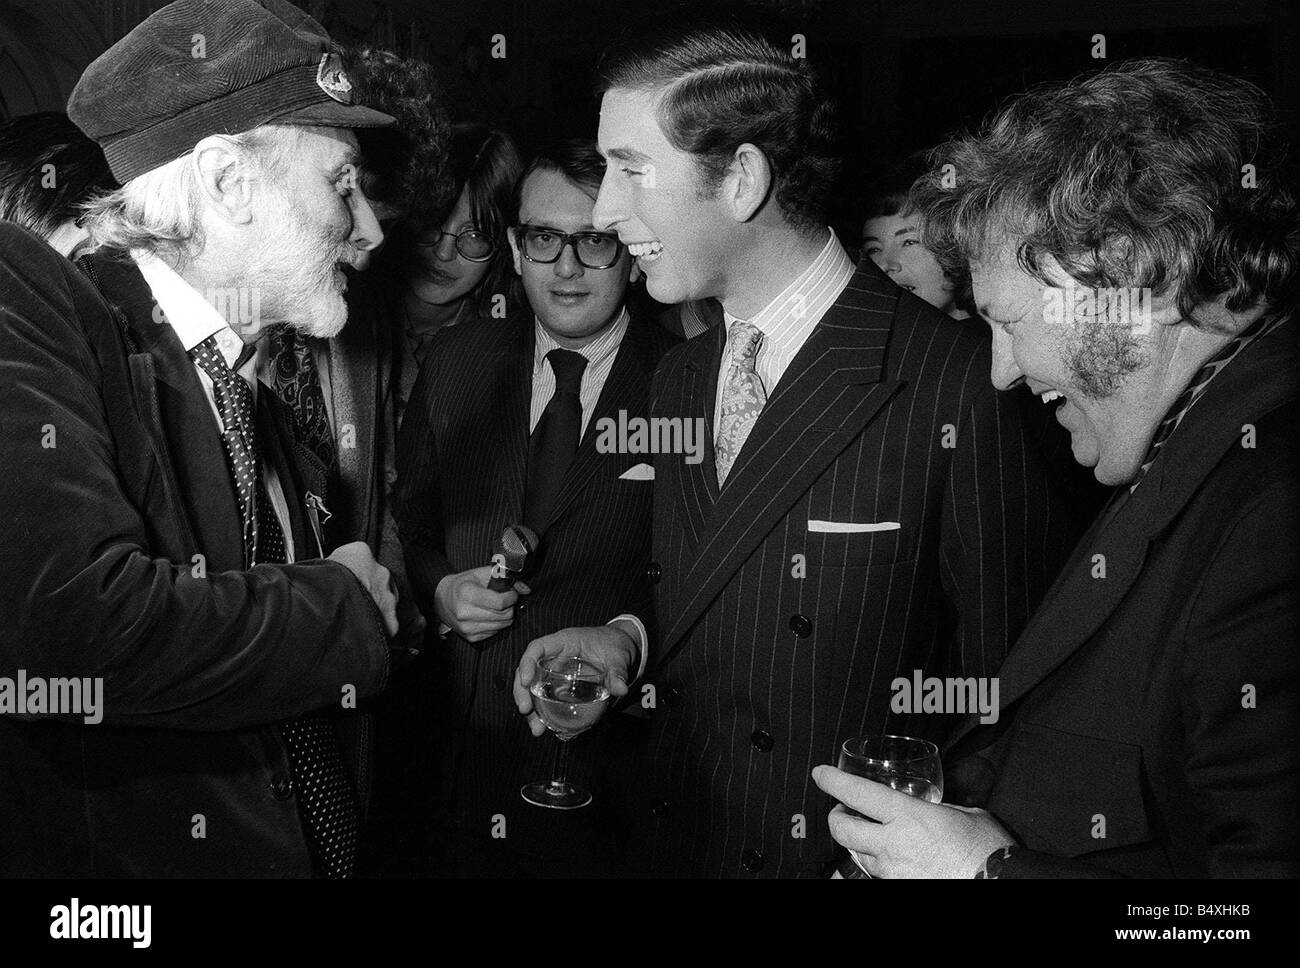 Prince Charles November 1973 has a laugh with Harry Secombe an Spike Milligan at the launching of a new Goons book at the Eccentric Club in London Reporters Paul Callan and Janet Street Porter listen in on the conversation Stock Photo